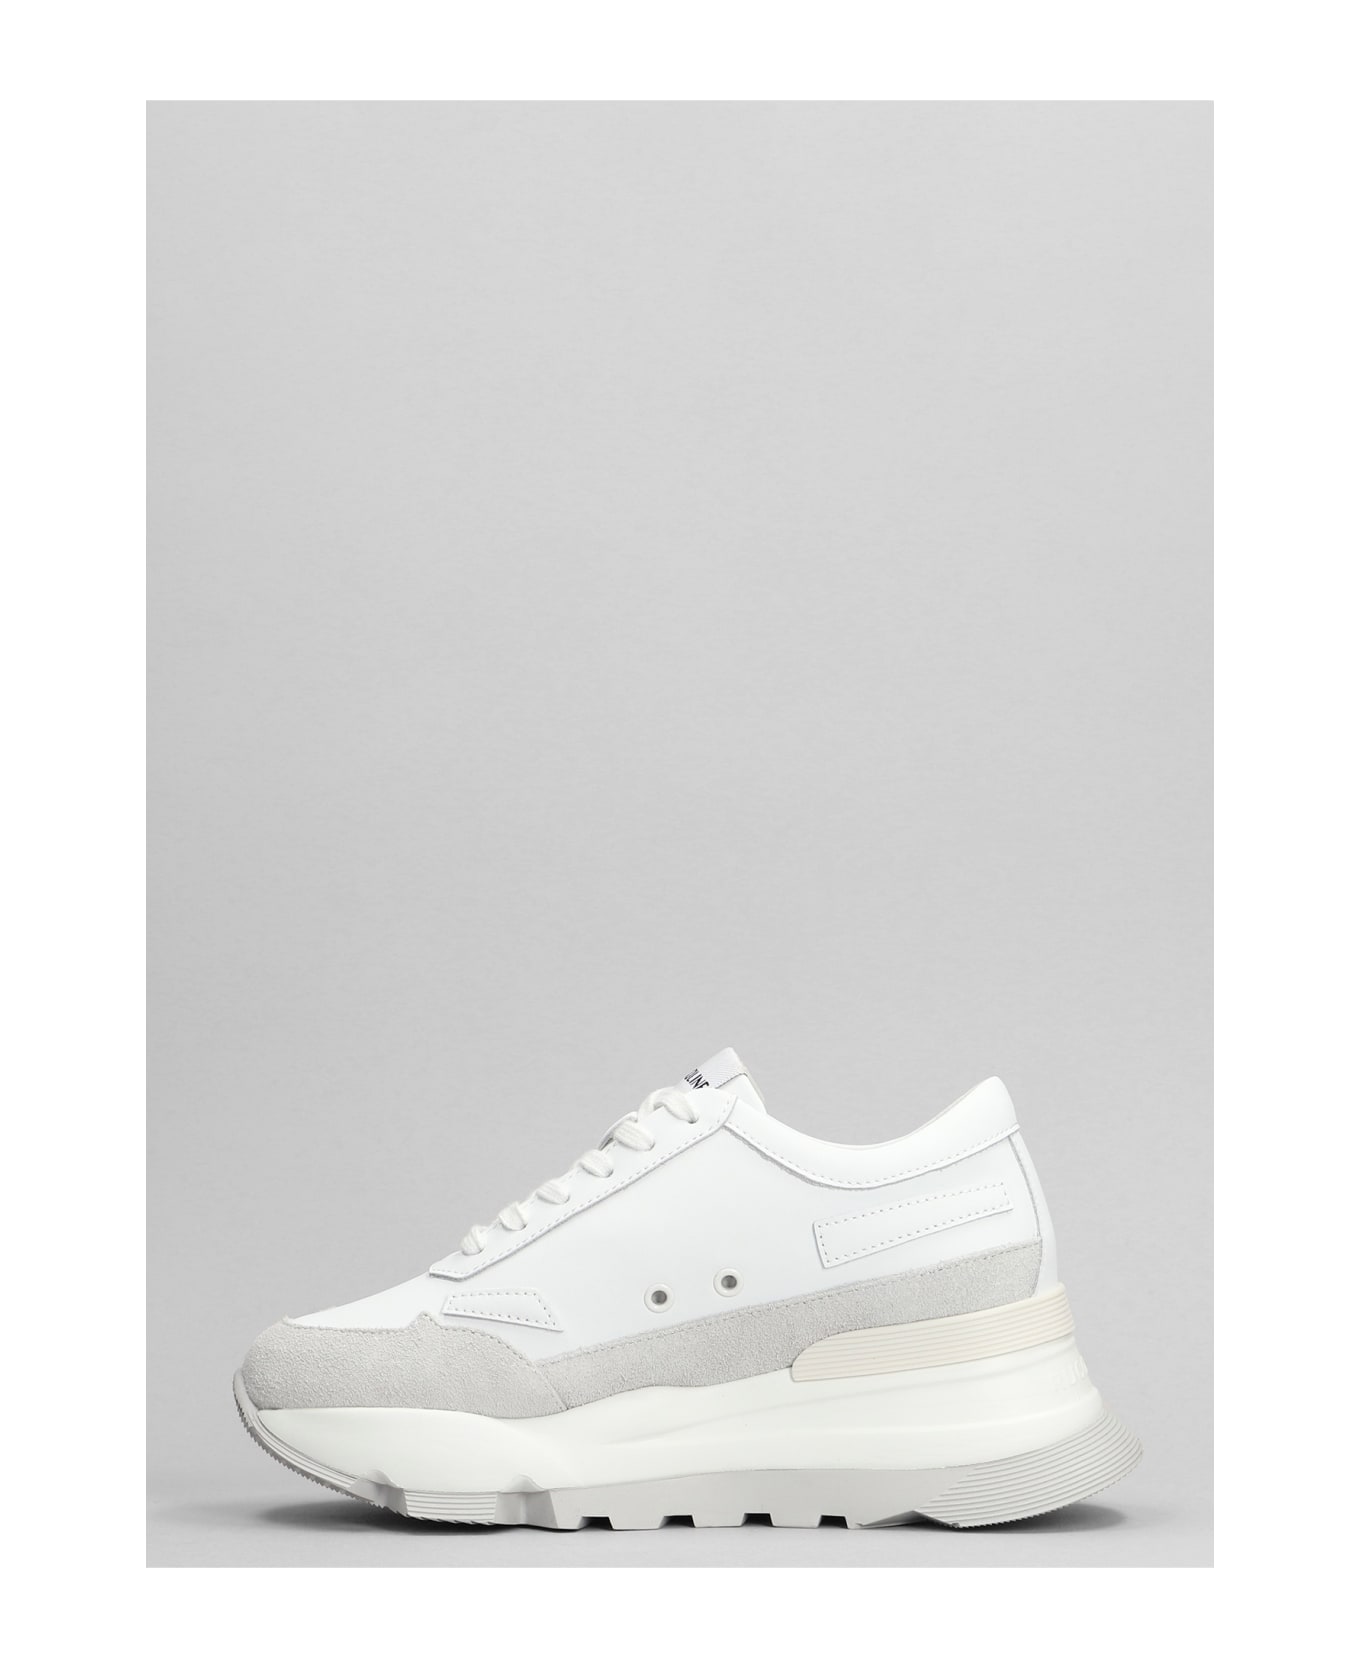 Ruco Line Aki Sneakers In White Suede And Leather - white